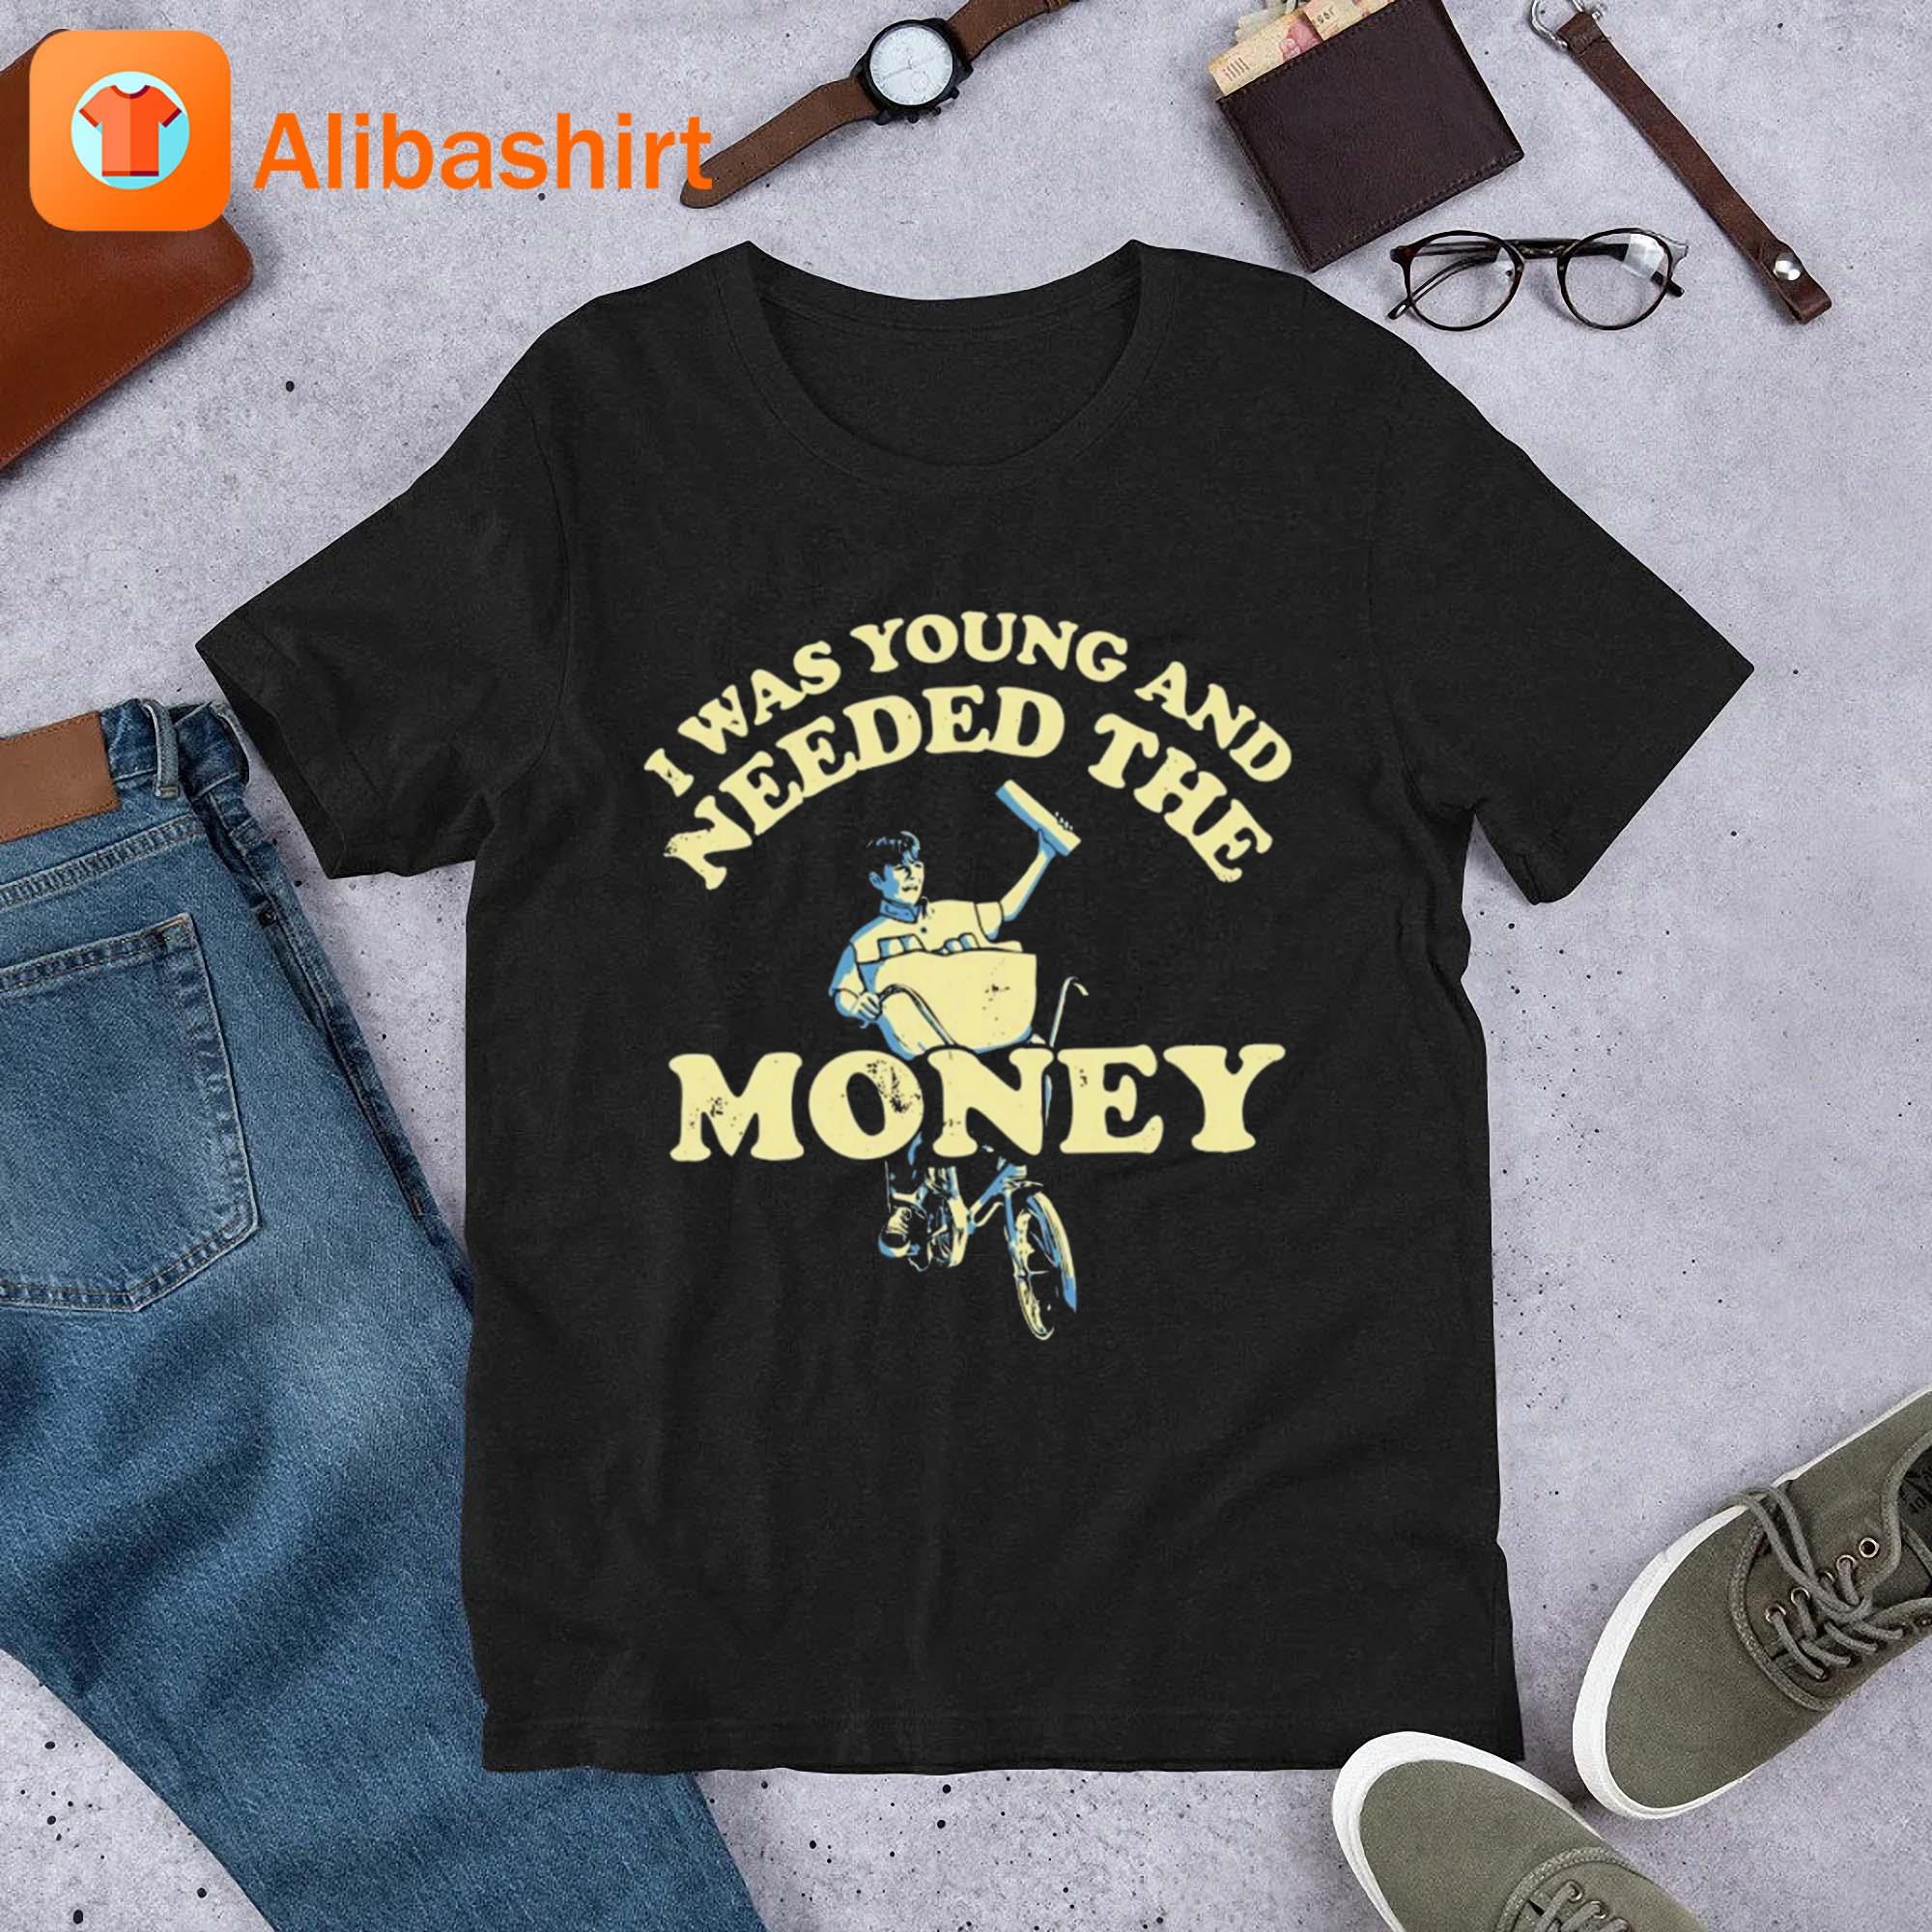 I Was Young And I Needed The Money Shirt